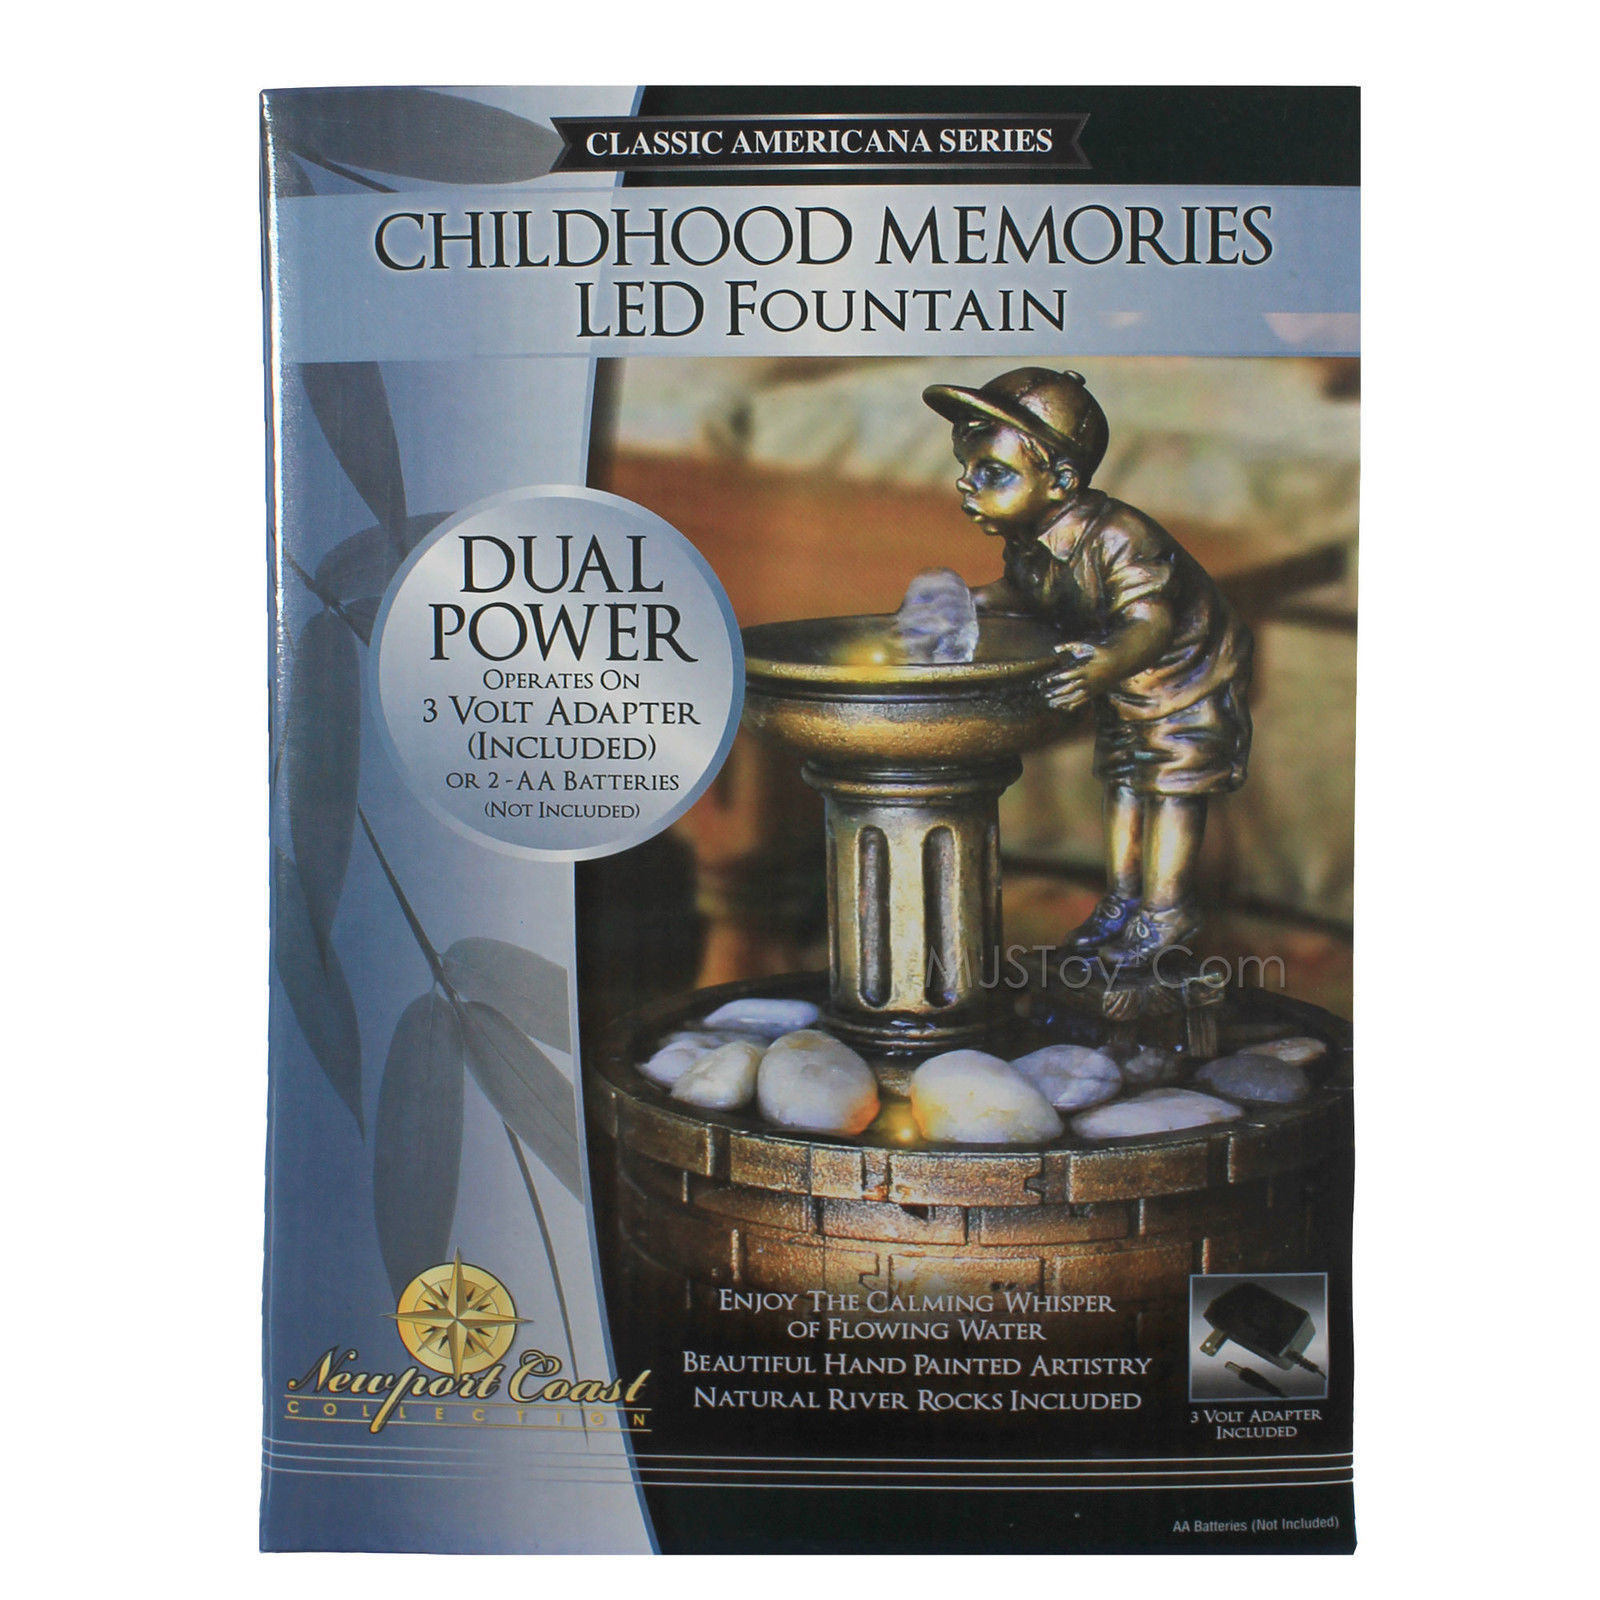 NEW Classic Americana Series Bronze Childhood Memories 8" LED Relaxing Fountain - $29.99